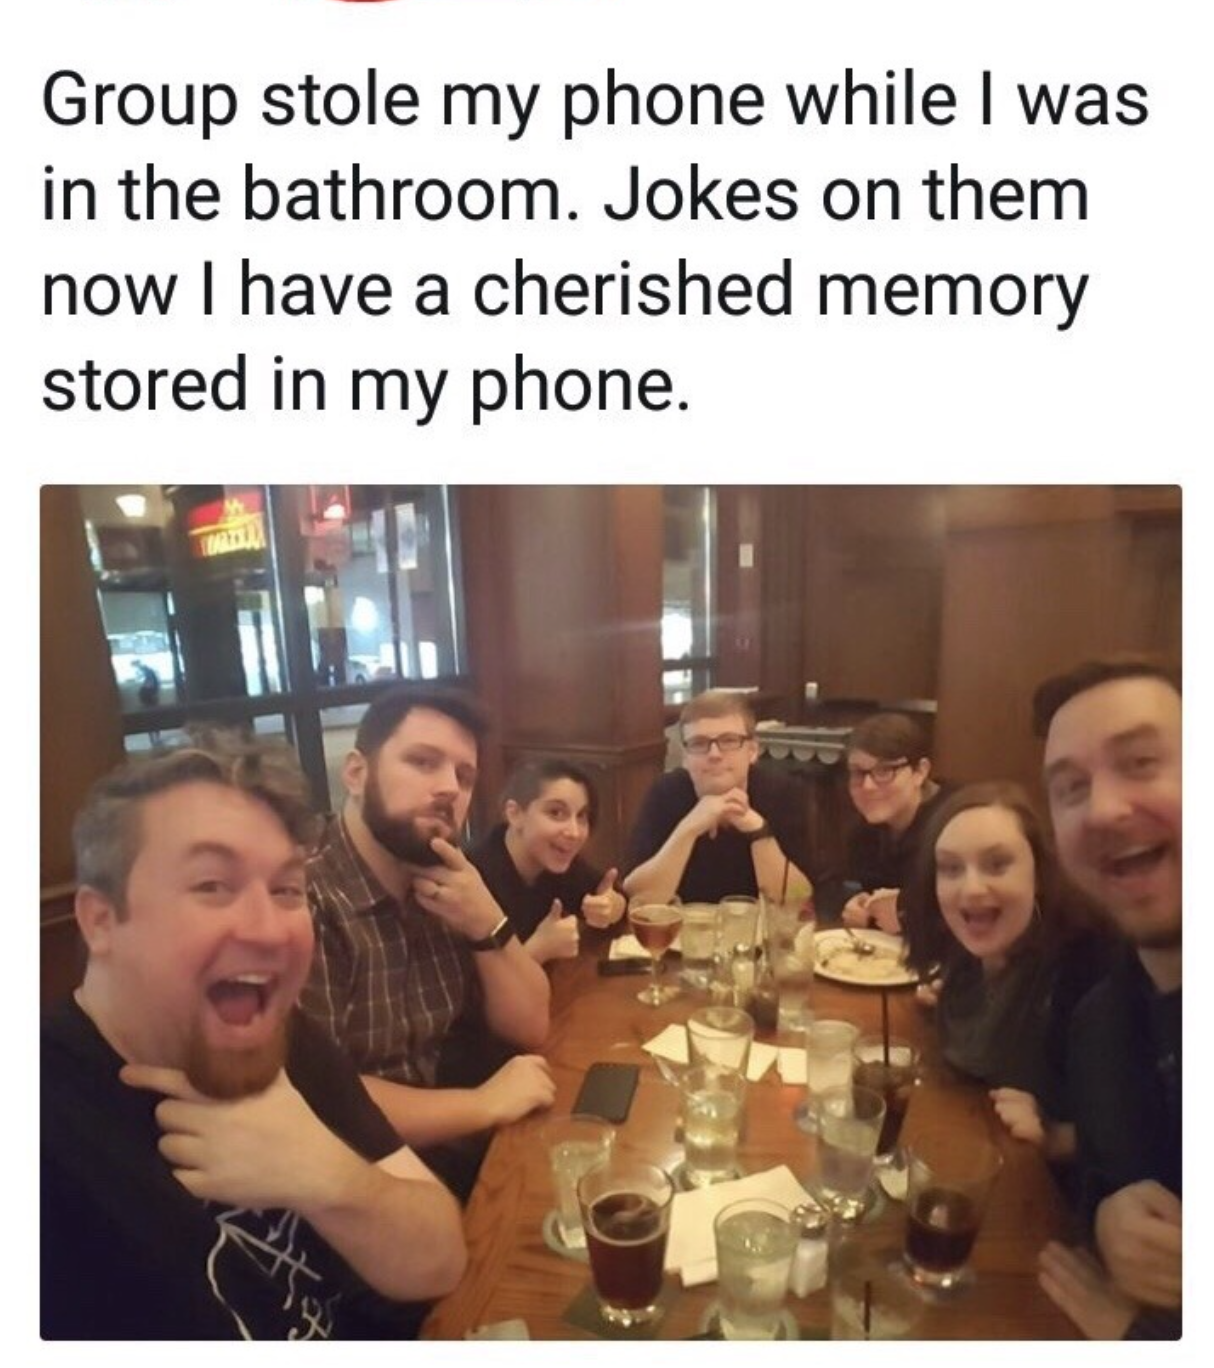 Meme - Group stole my phone while I was in the bathroom. Jokes on them now I have a cherished memory stored in my phone.